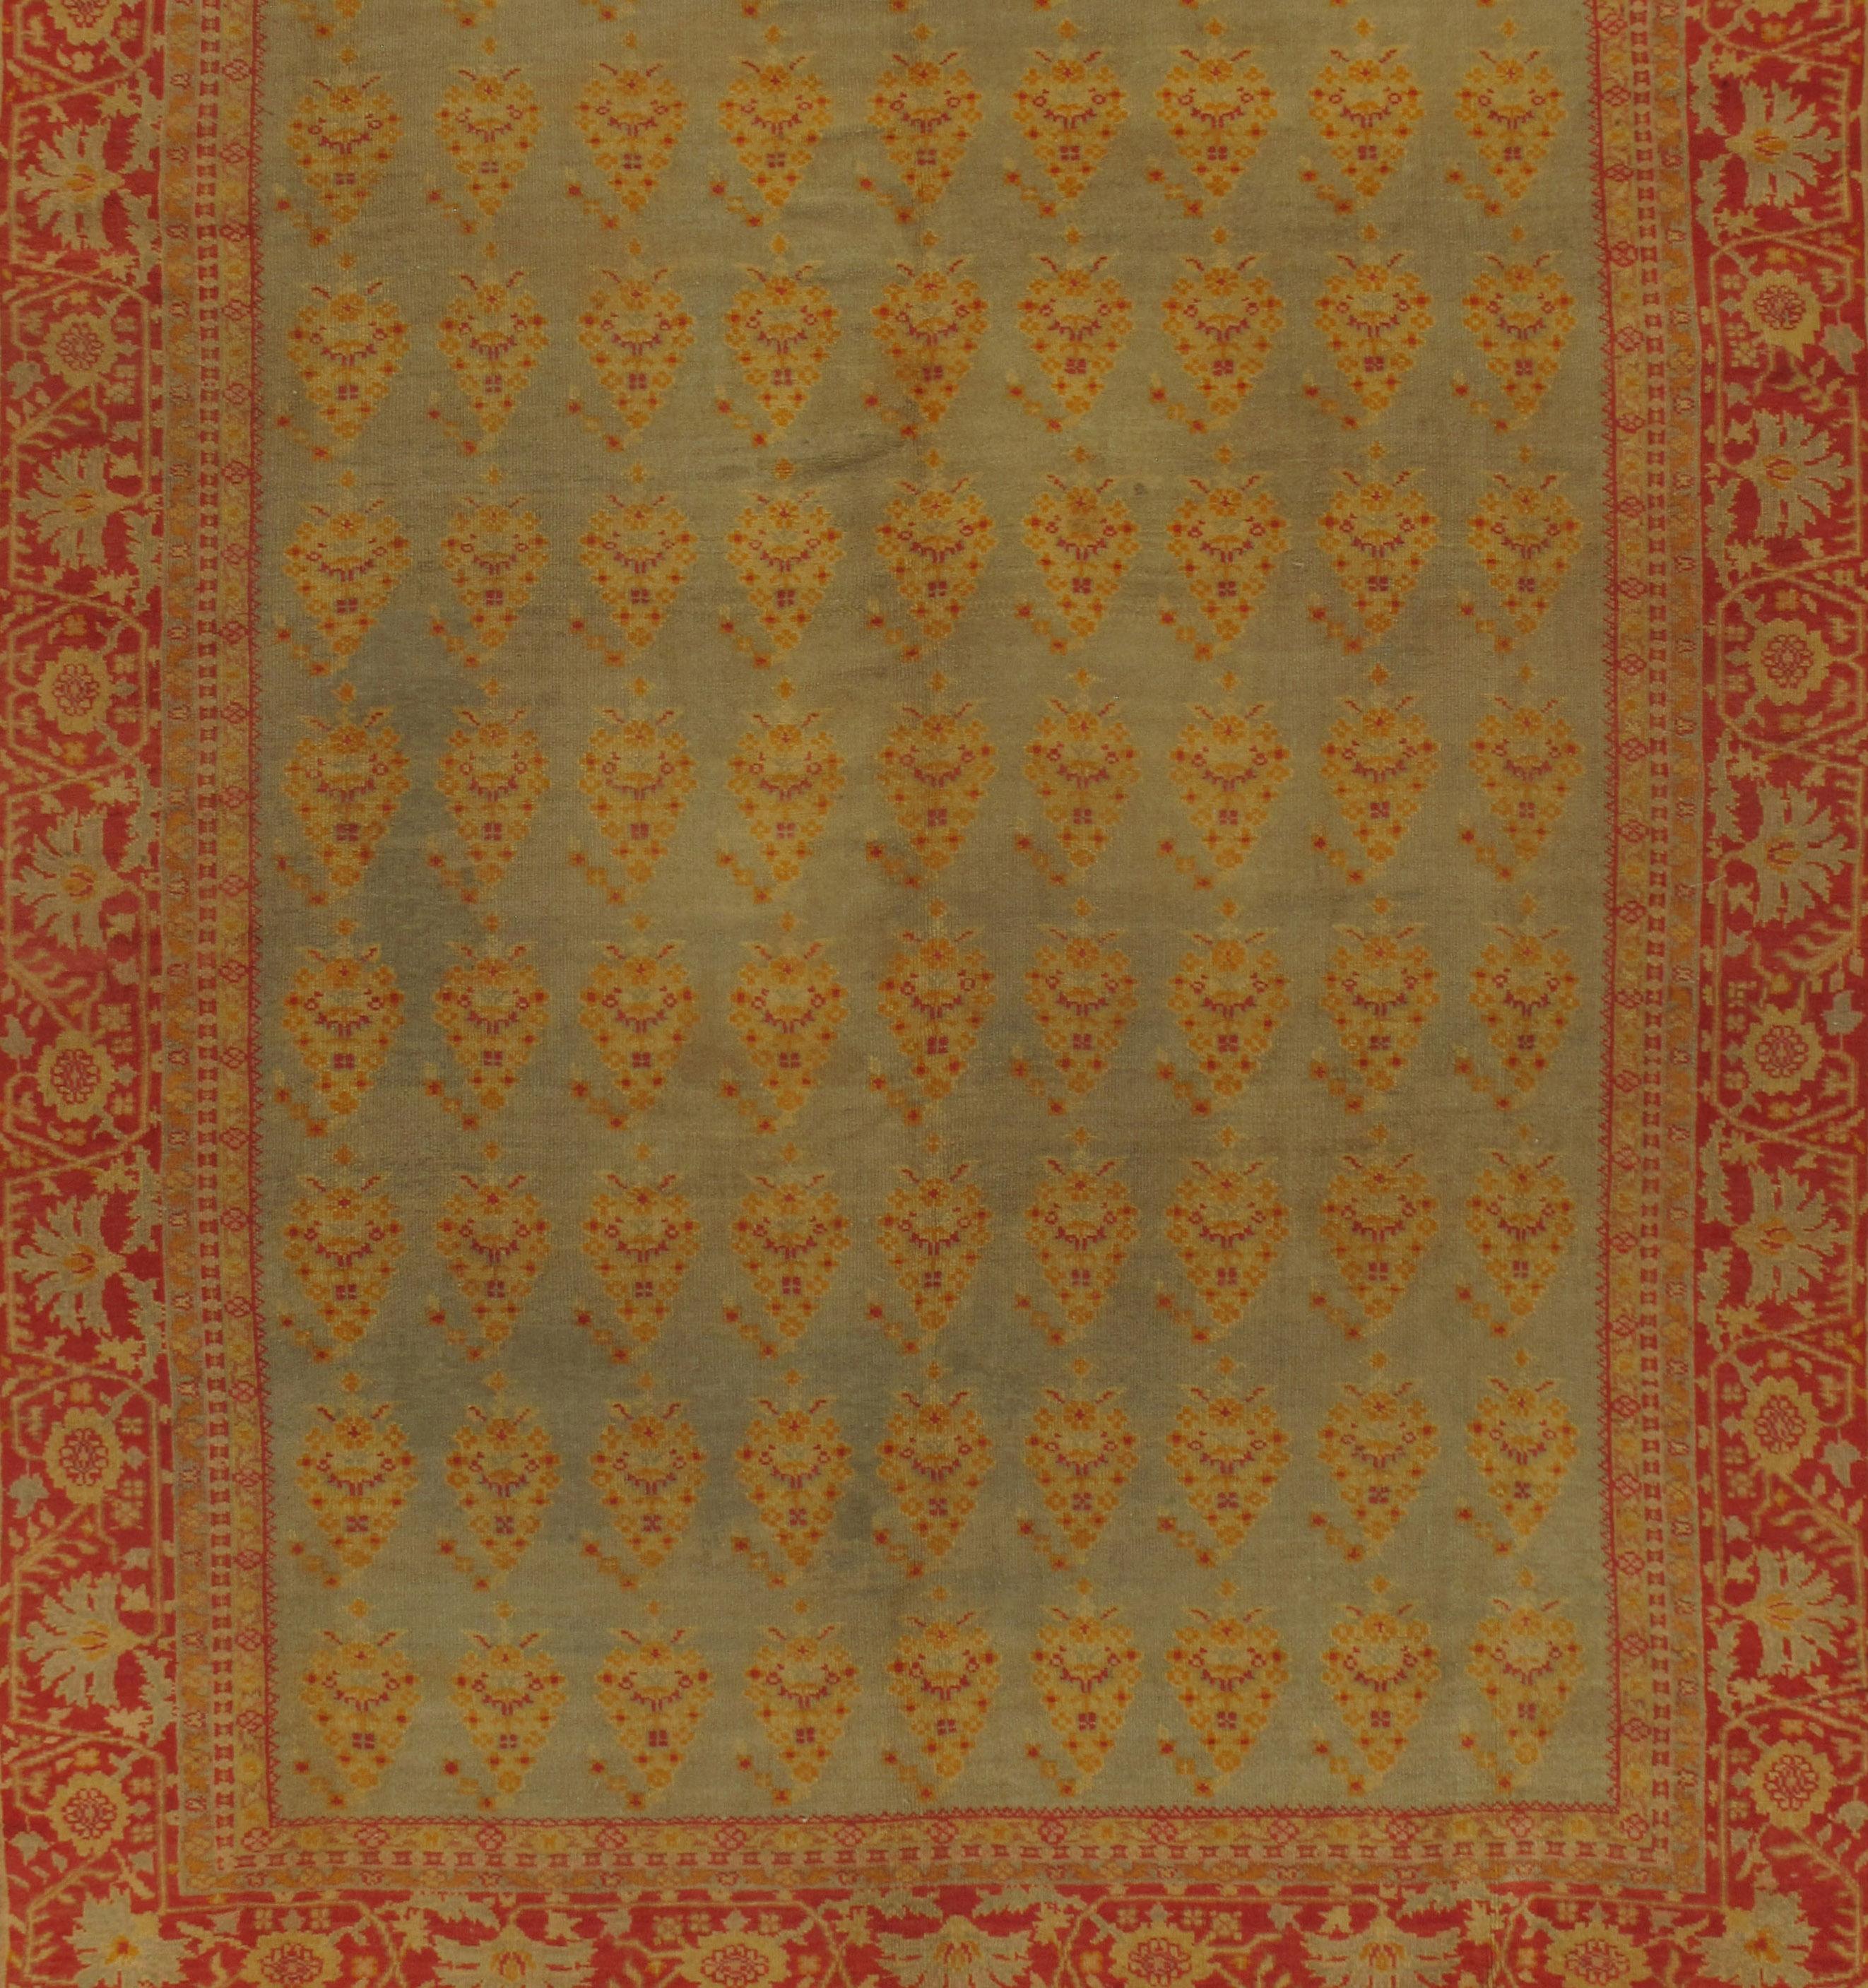 Vintage Turkish Oushak rug carpet, circa 1940 9'4 x 11'10. The soft colors in the field which is filled with repeating floral motifs is surrounded by a main border in soft reds to create a rug that has harmony in this antique Turkish Oushak.